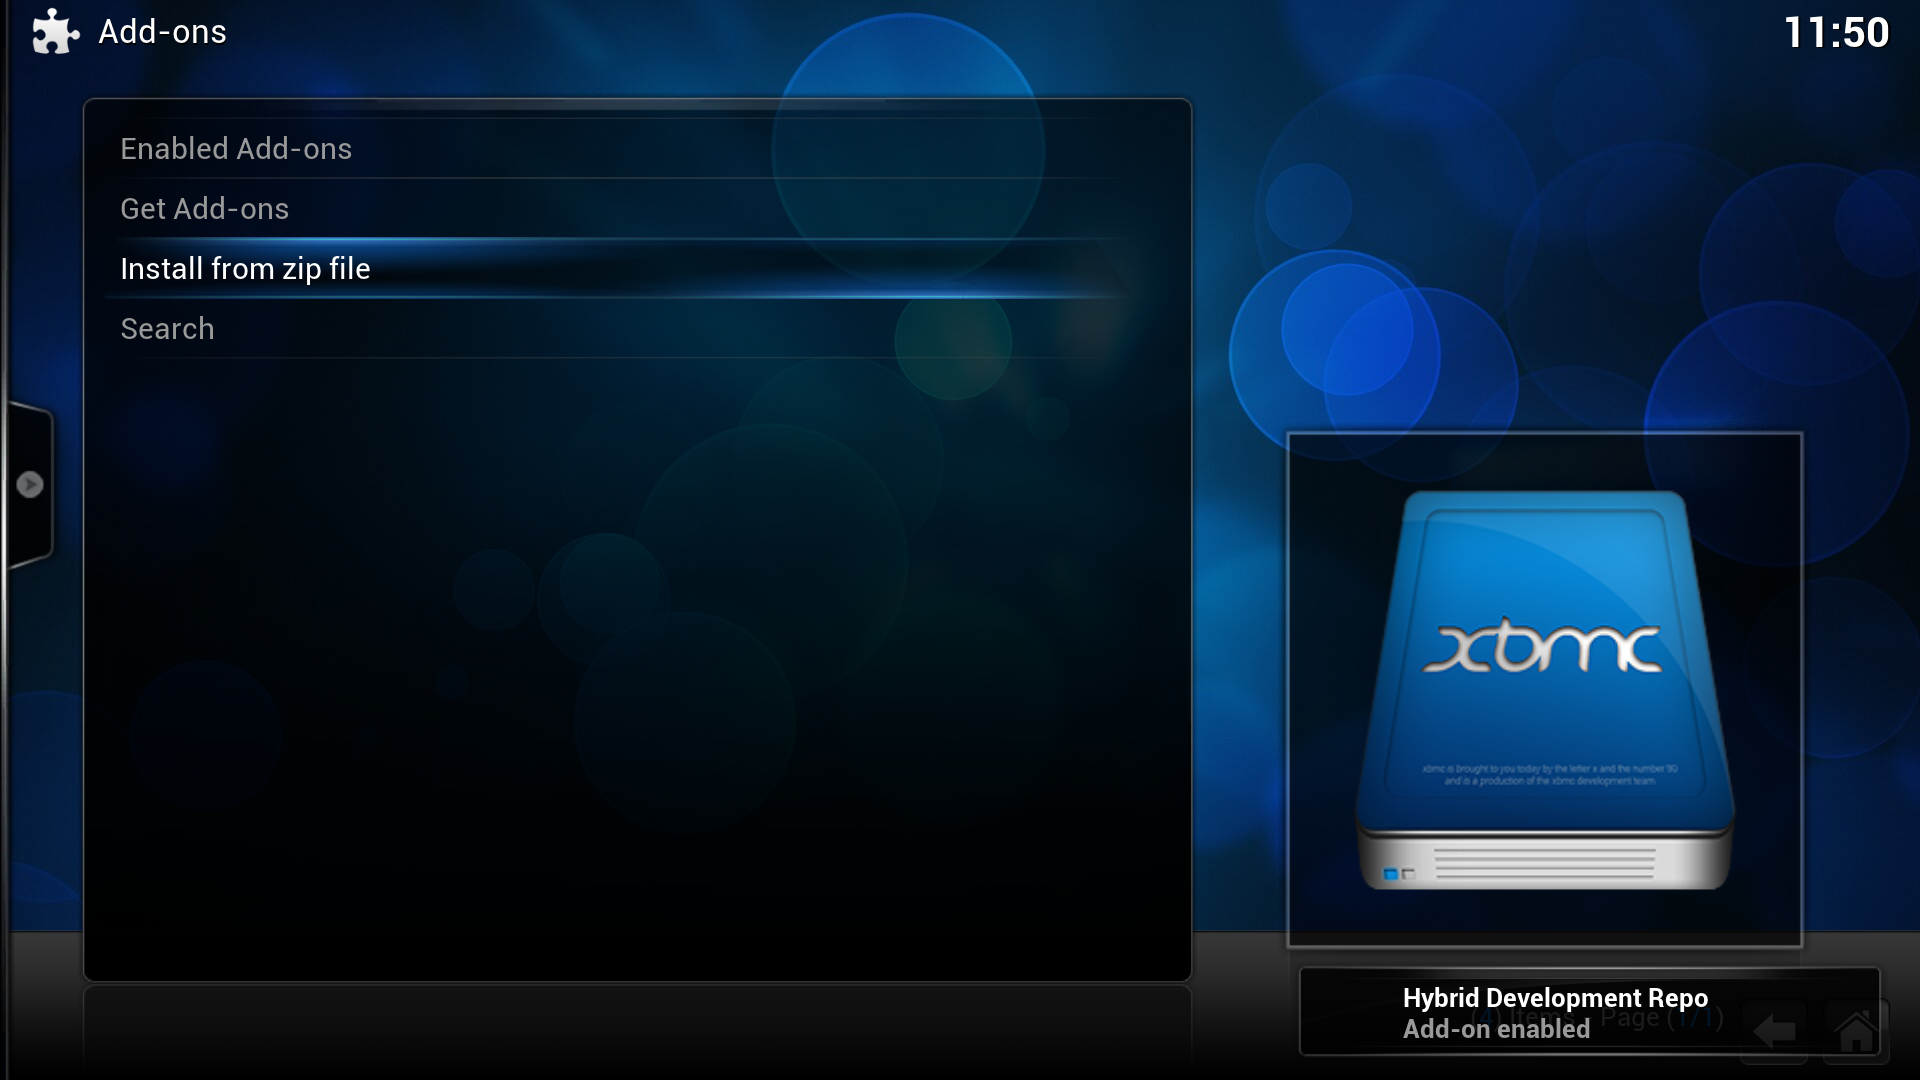 Step 3: In the bottom right, XBMC notifies when the add-on is installed and enabled. Click into Get Add-ons.